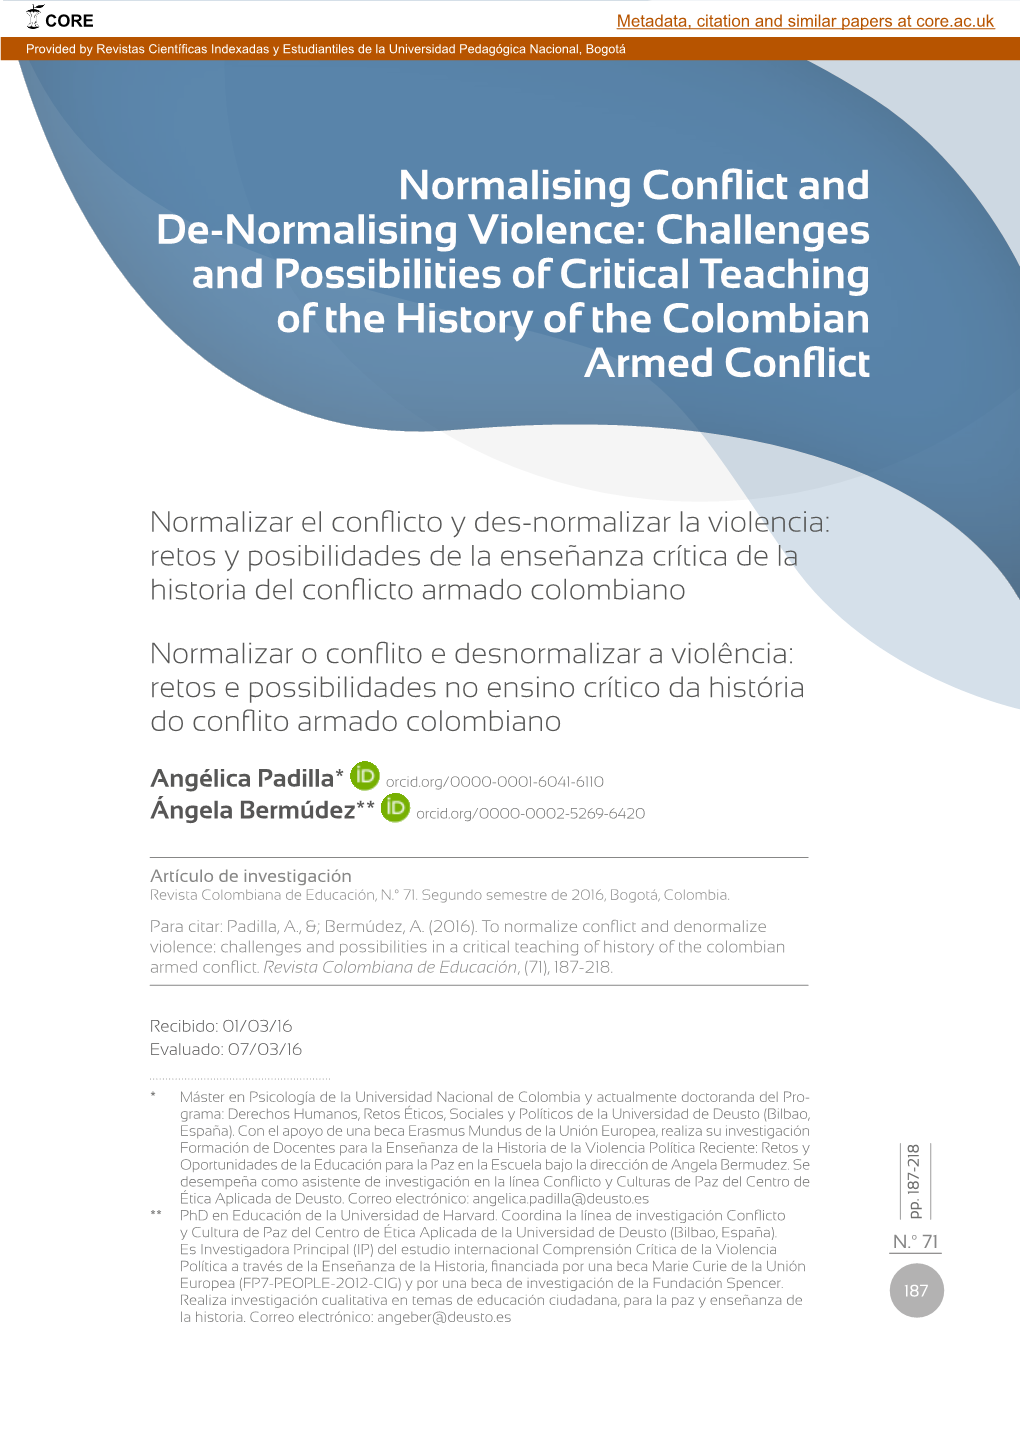 Challenges and Possibilities of Critical Teaching of the History of the Colombian Armed Conflict